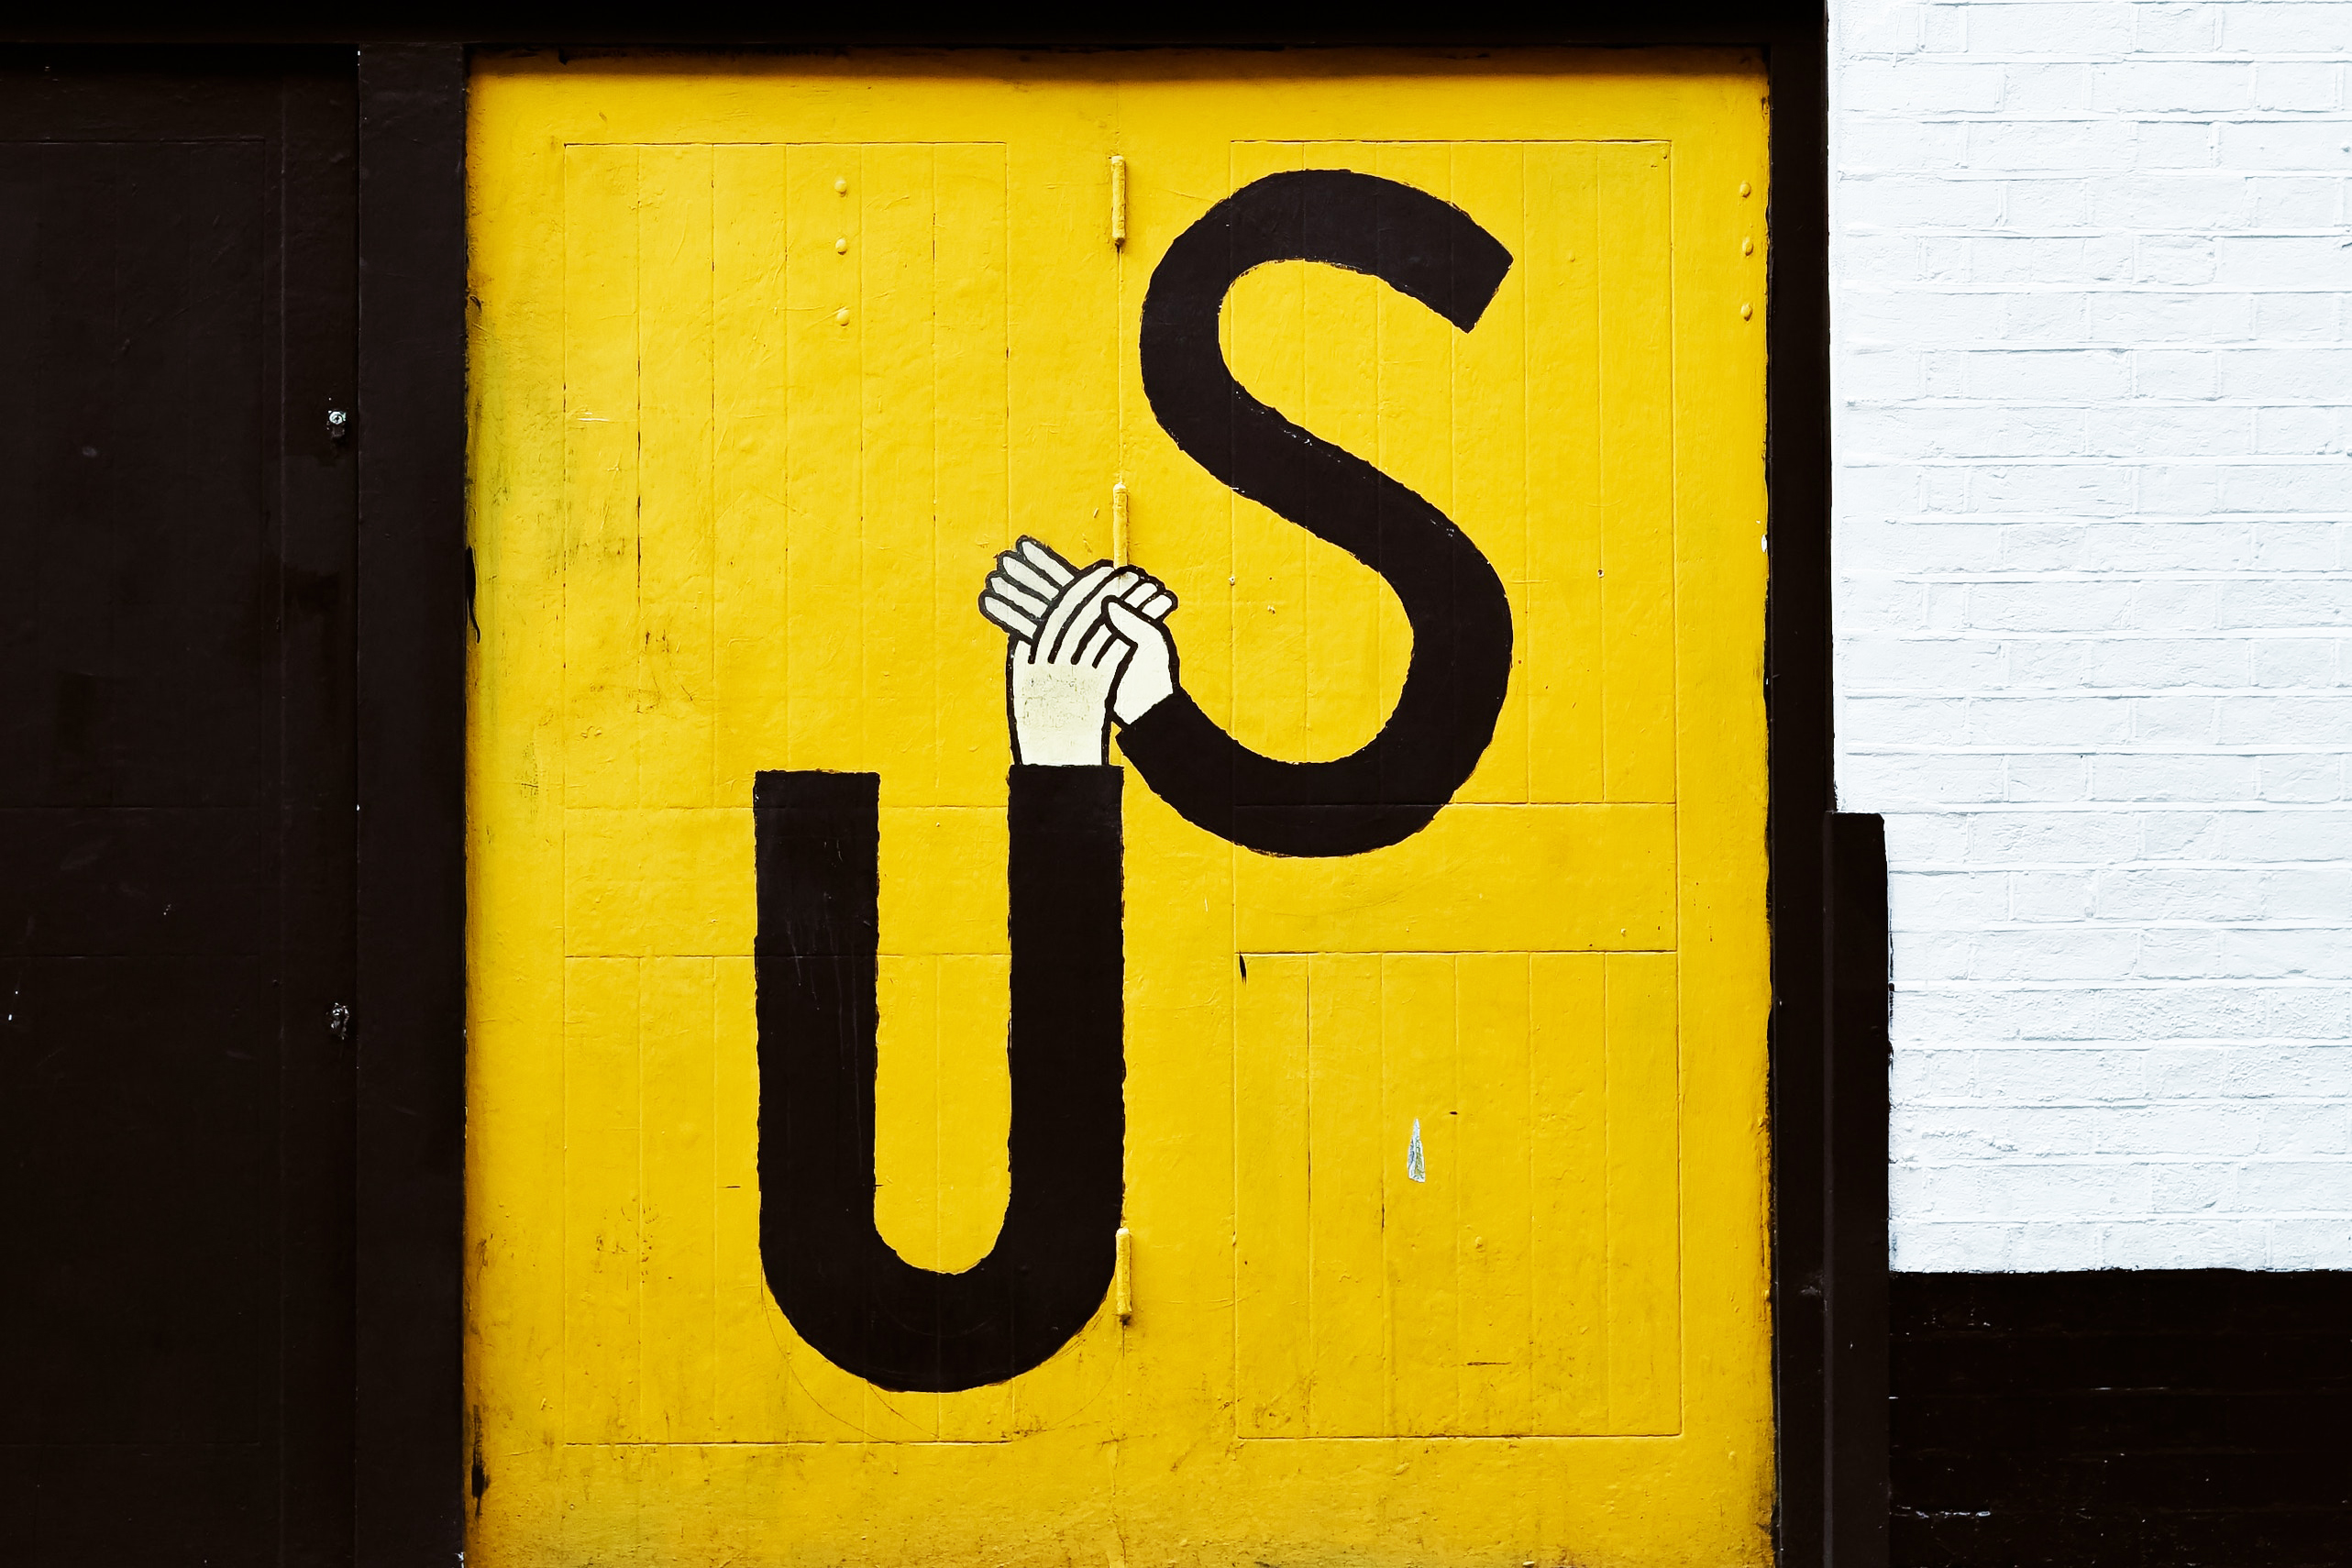 A painted street sign that says 'Us' and is designed so that the letter 'u' and the letter 's' are diagonally aligned and joined with two hands